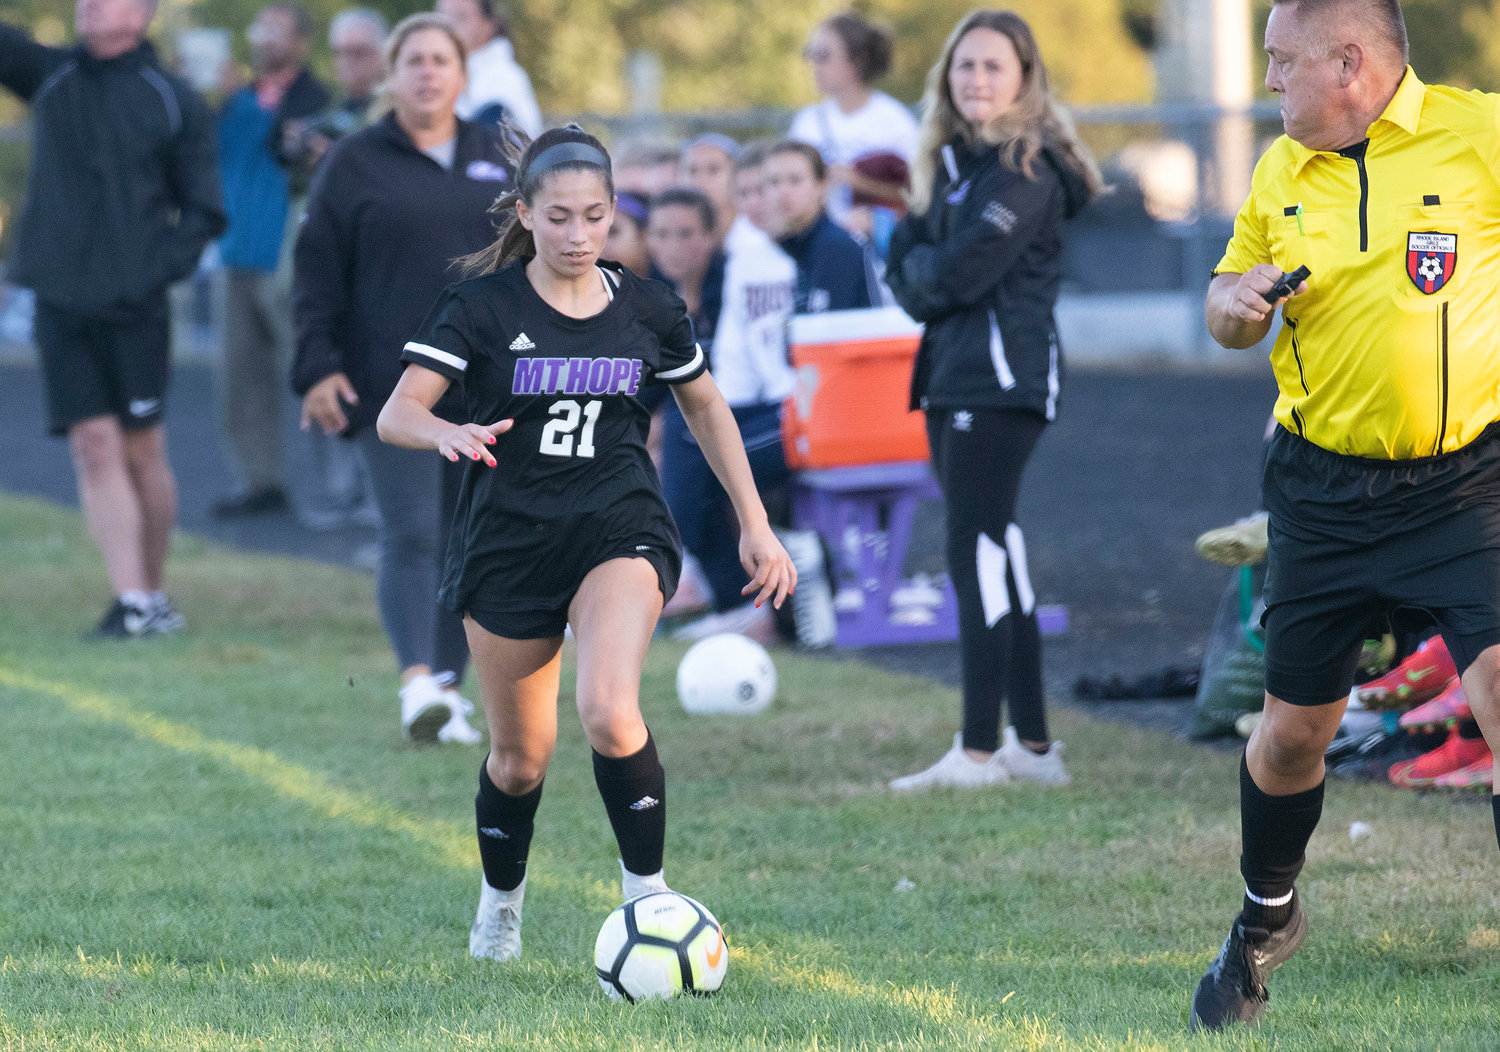 Midfielder Lilliana Redman dribbles up the sideline by the Huskies bench.